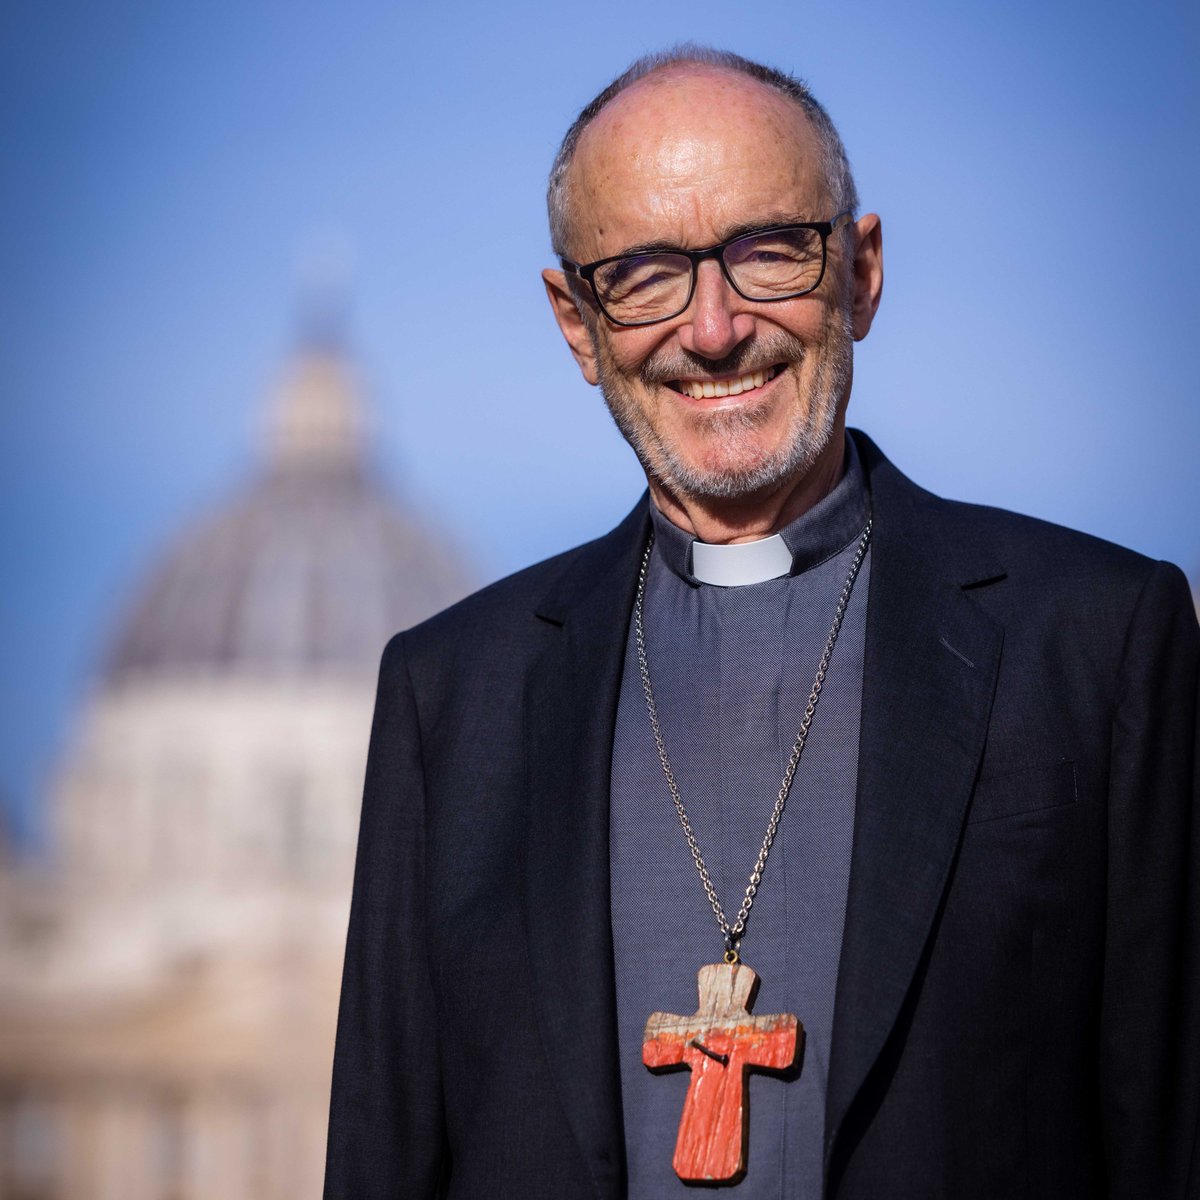 Pope Francis has appointed Cardinal Michael Czerny, S.J., Prefect of the Dicastery for Promoting Integral Human Development, as a Member of the Council of the Section for Relations with States and International Organizations of the Secretariat of State. press.vatican.va/content/salast…